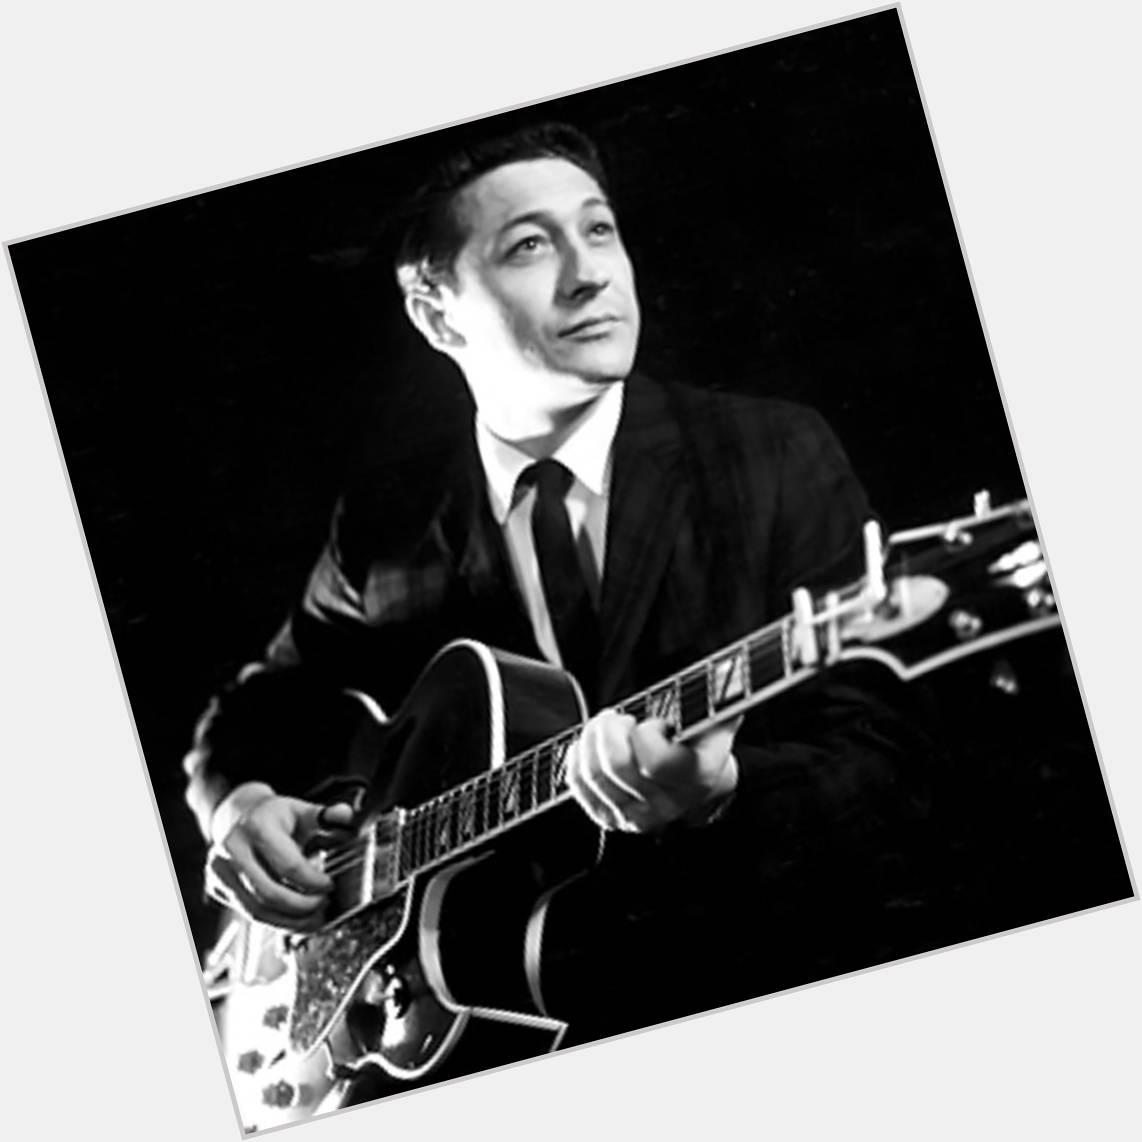 Https://fanpagepress.net/m/S/Scotty Moore Exclusive Hot Pic 3